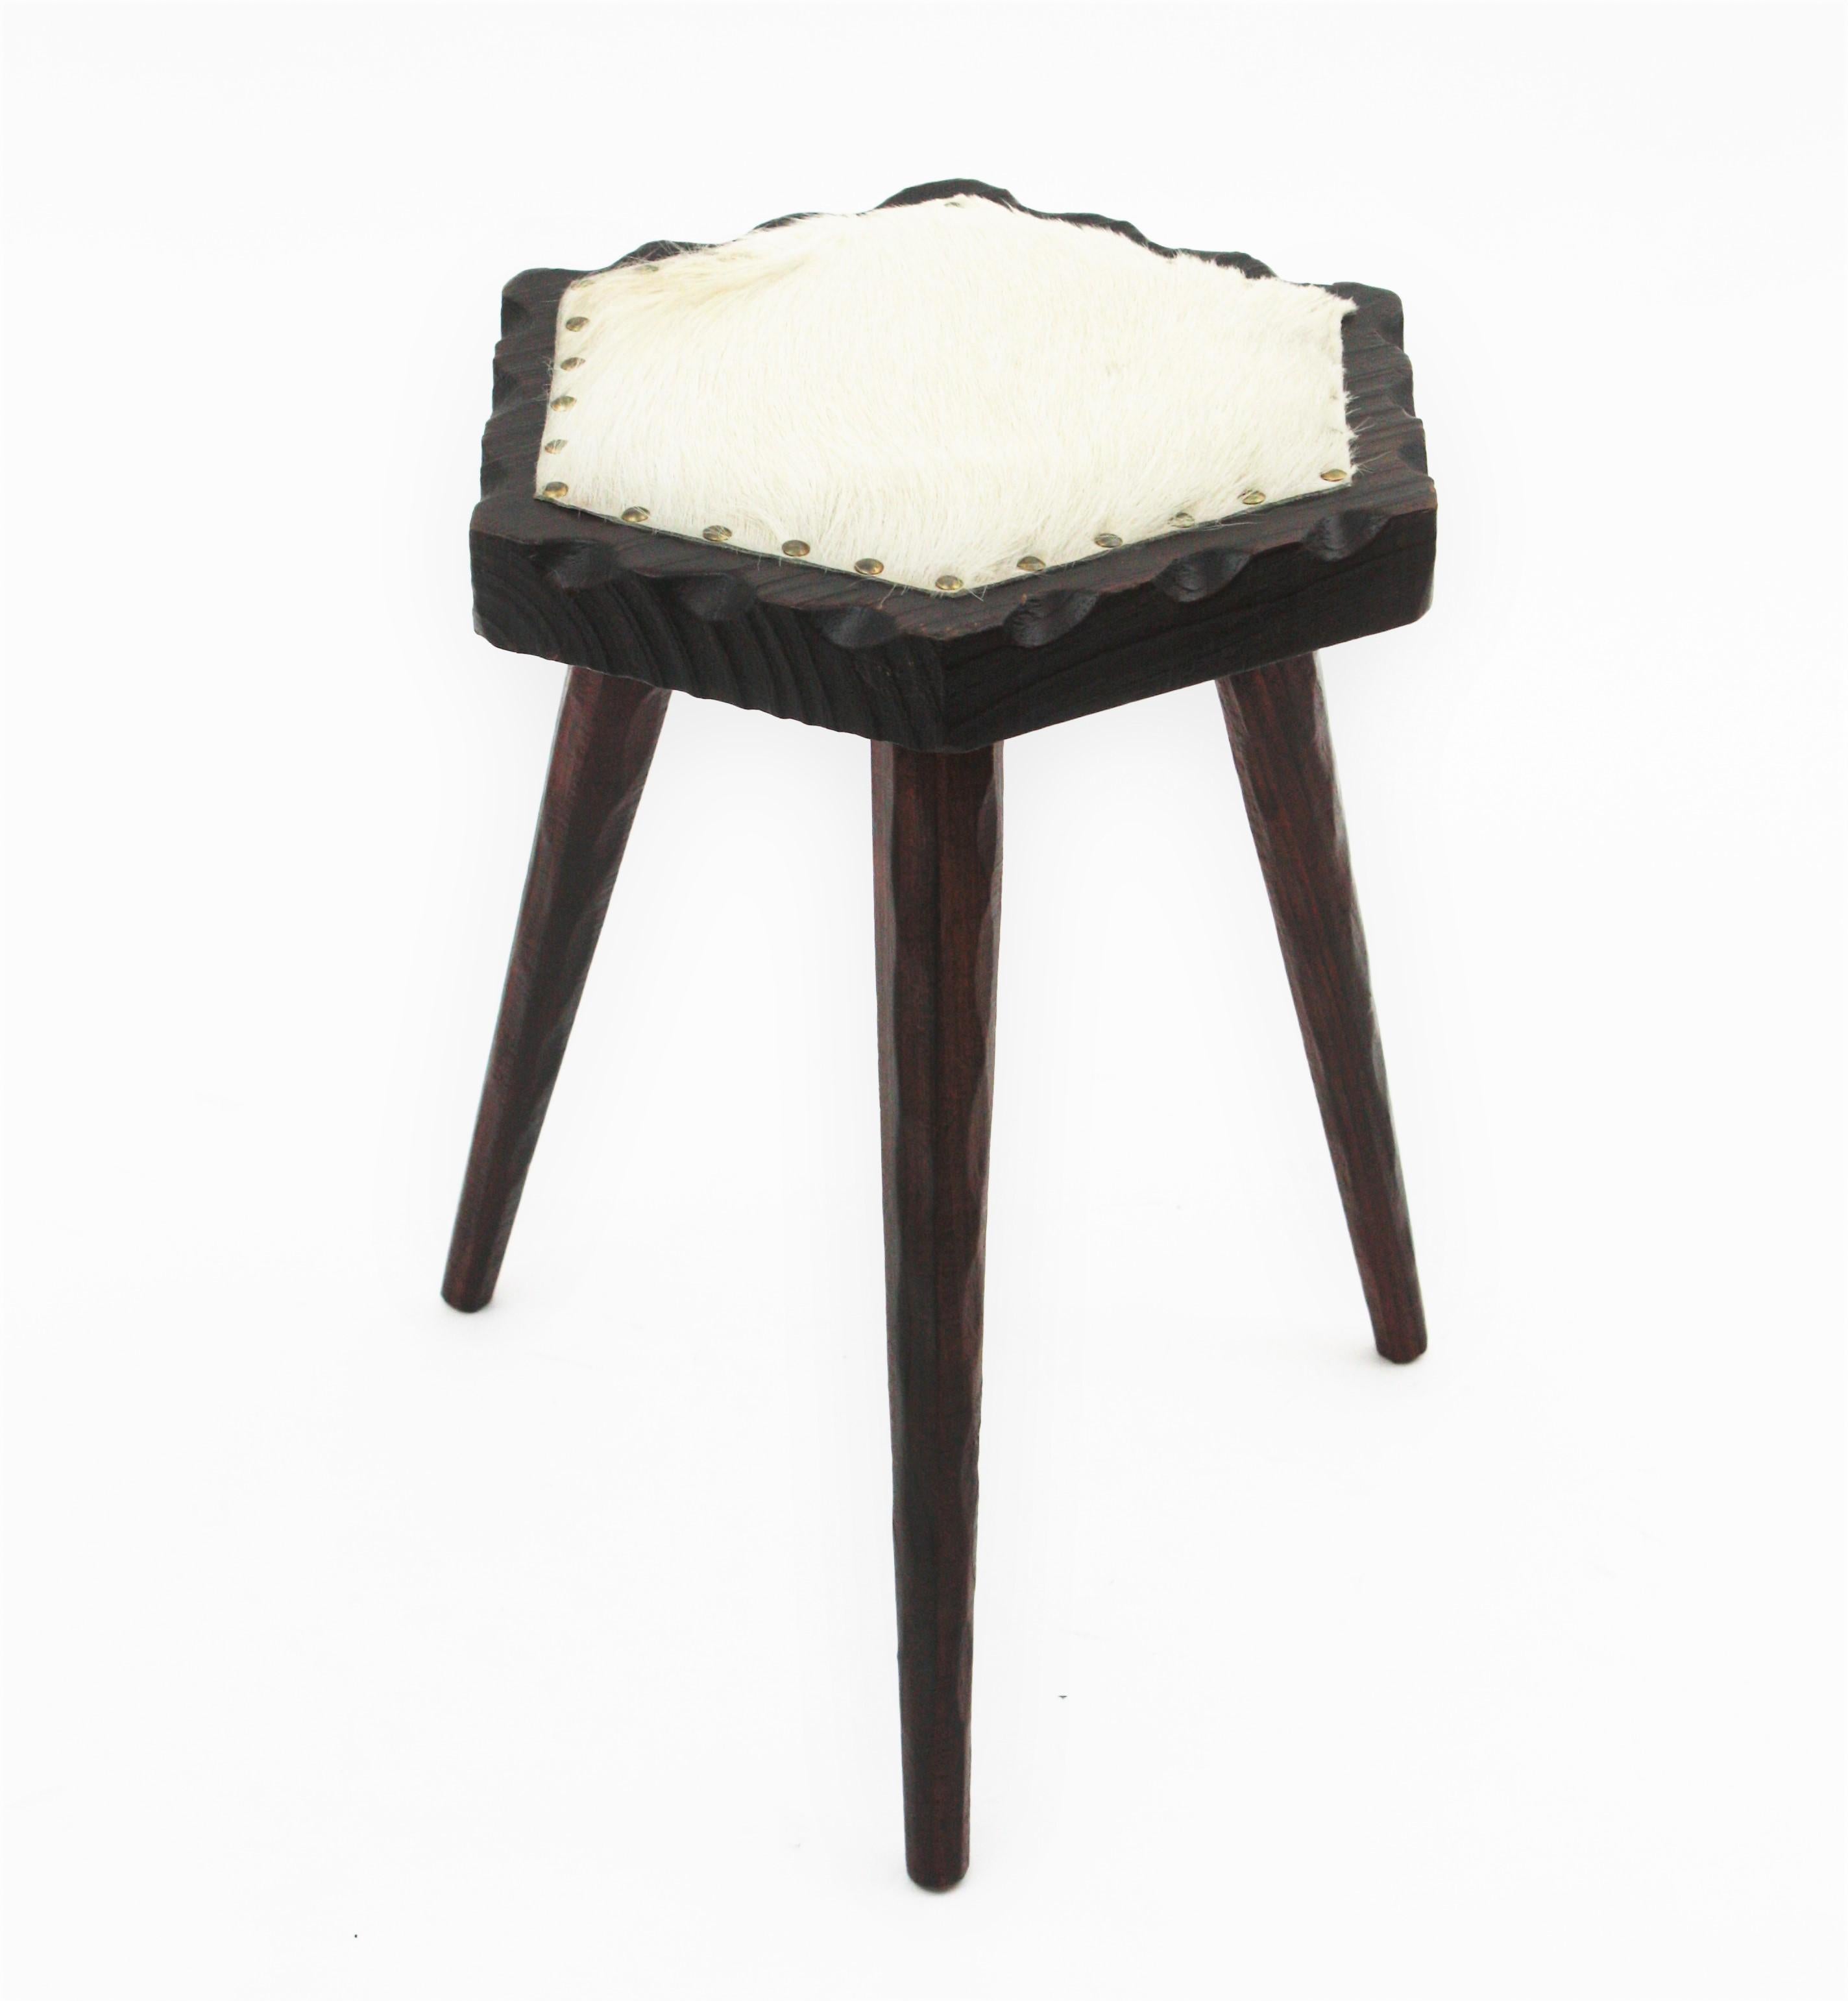 Hexagonal Wooden Tripod Stool with Fur Leather Top, Spain, 1940s
The top has scalloped details and is upholstered with cow fur in white color with studs accents.
This stool has a rustic finish and spanish colonial accents.
It will be a nice a